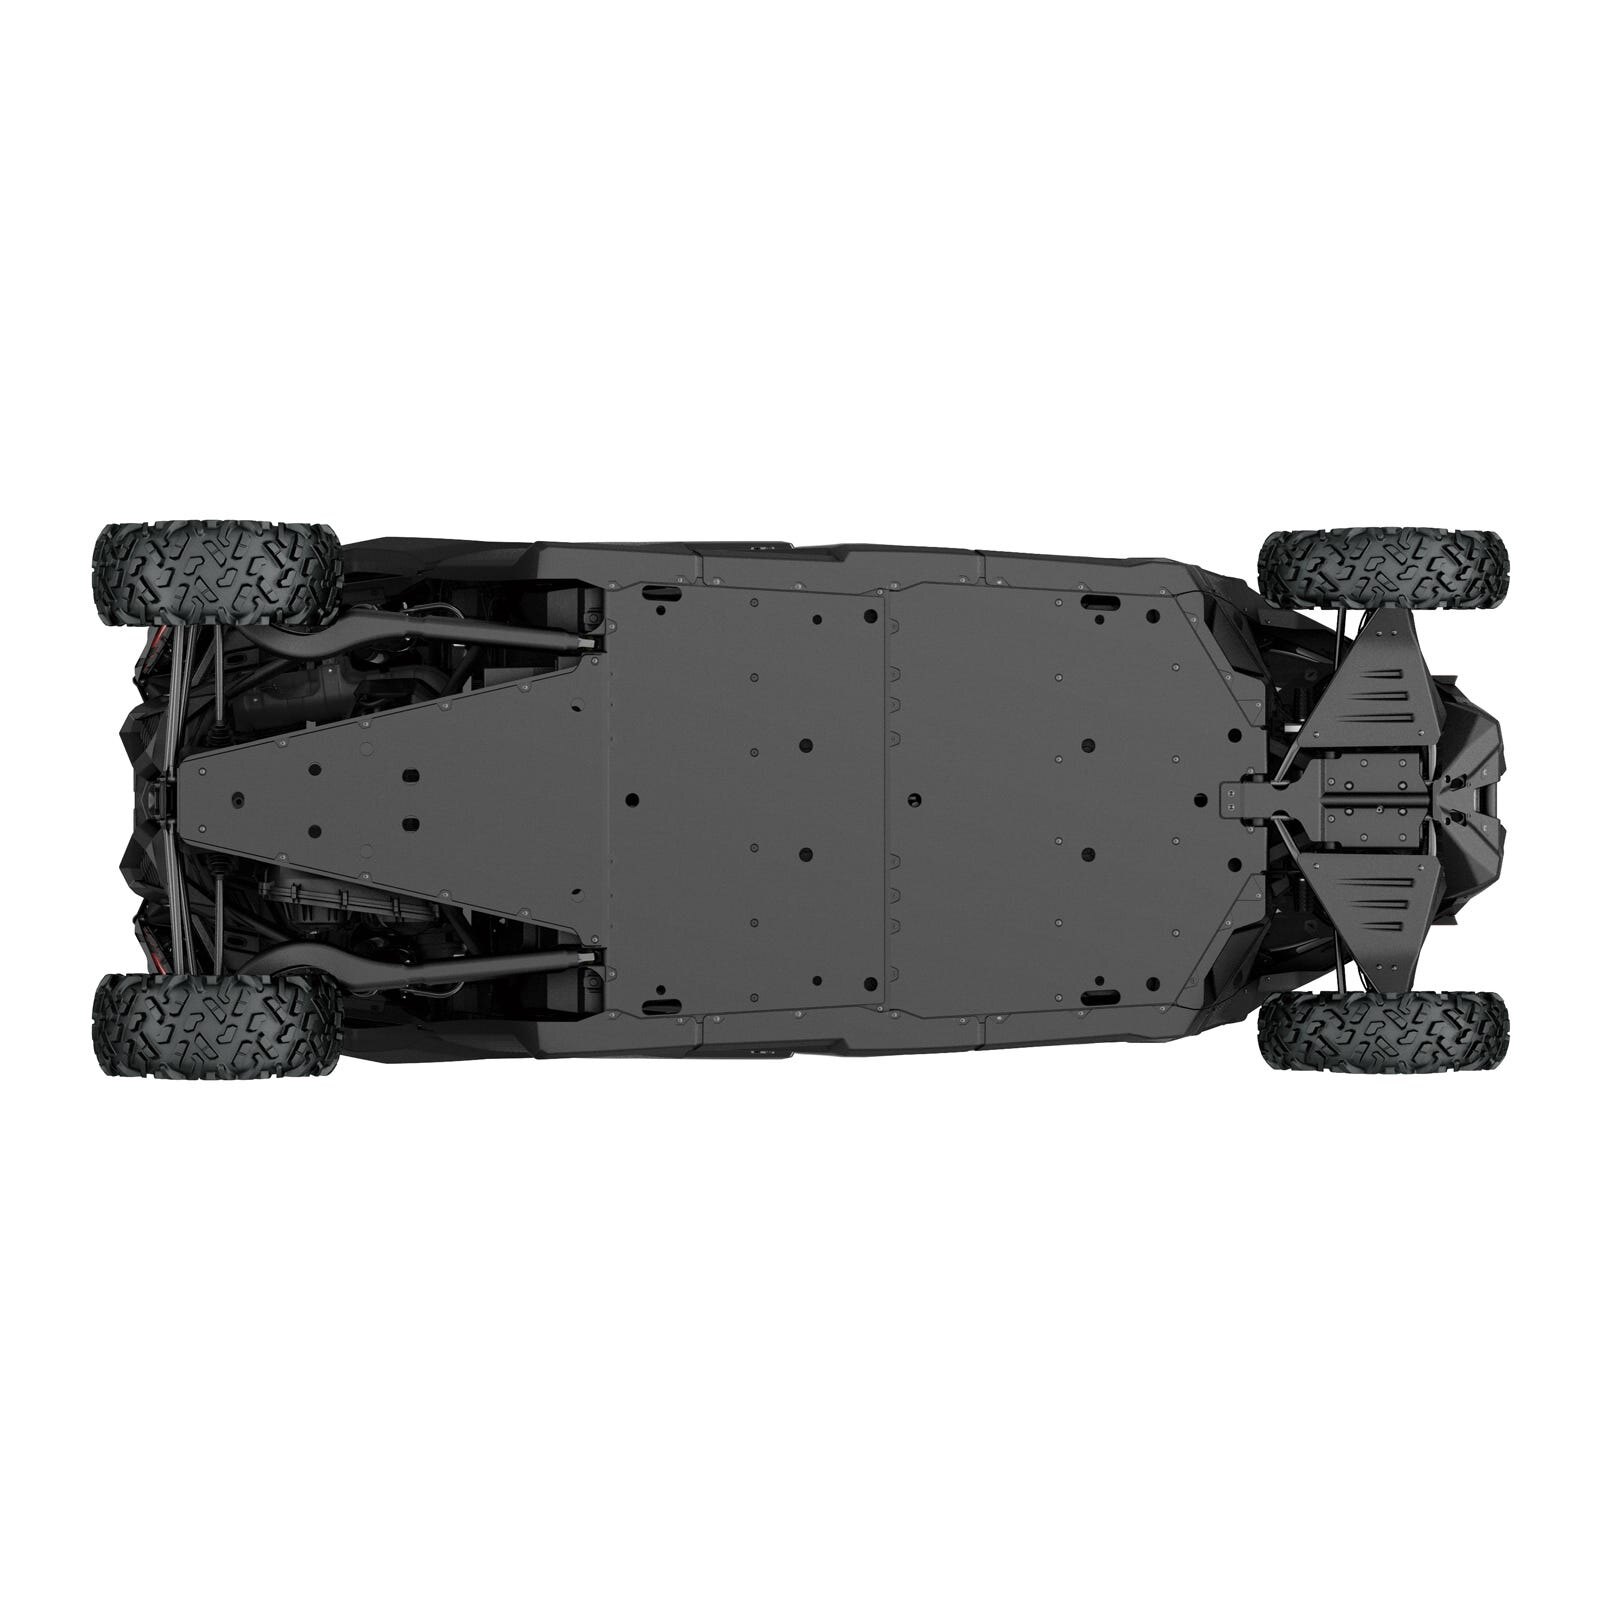 HMWPE Front Skid Plate